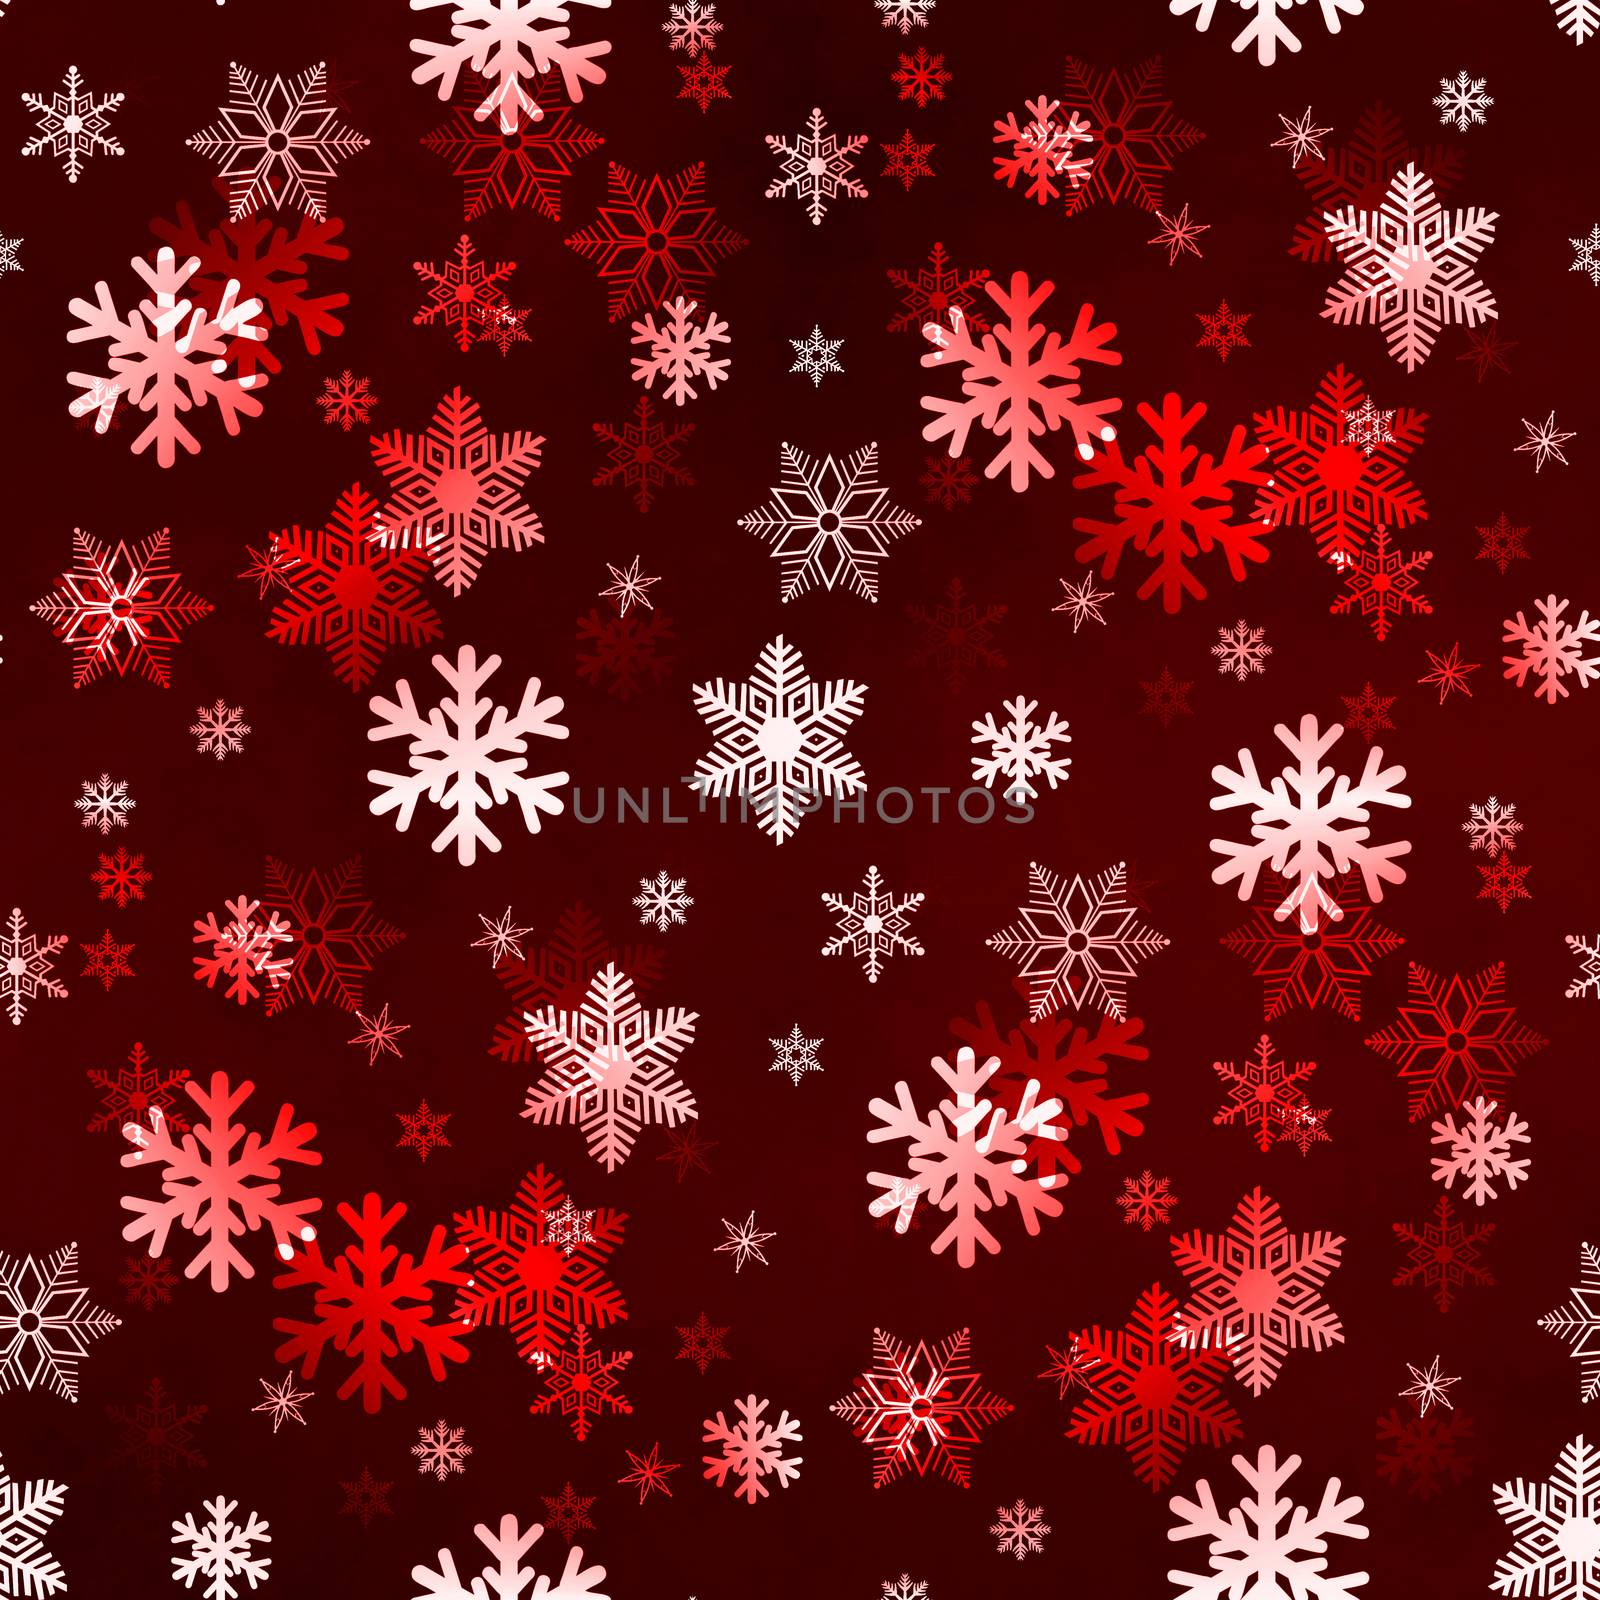 Dark Red Snowflakes by hlehnerer